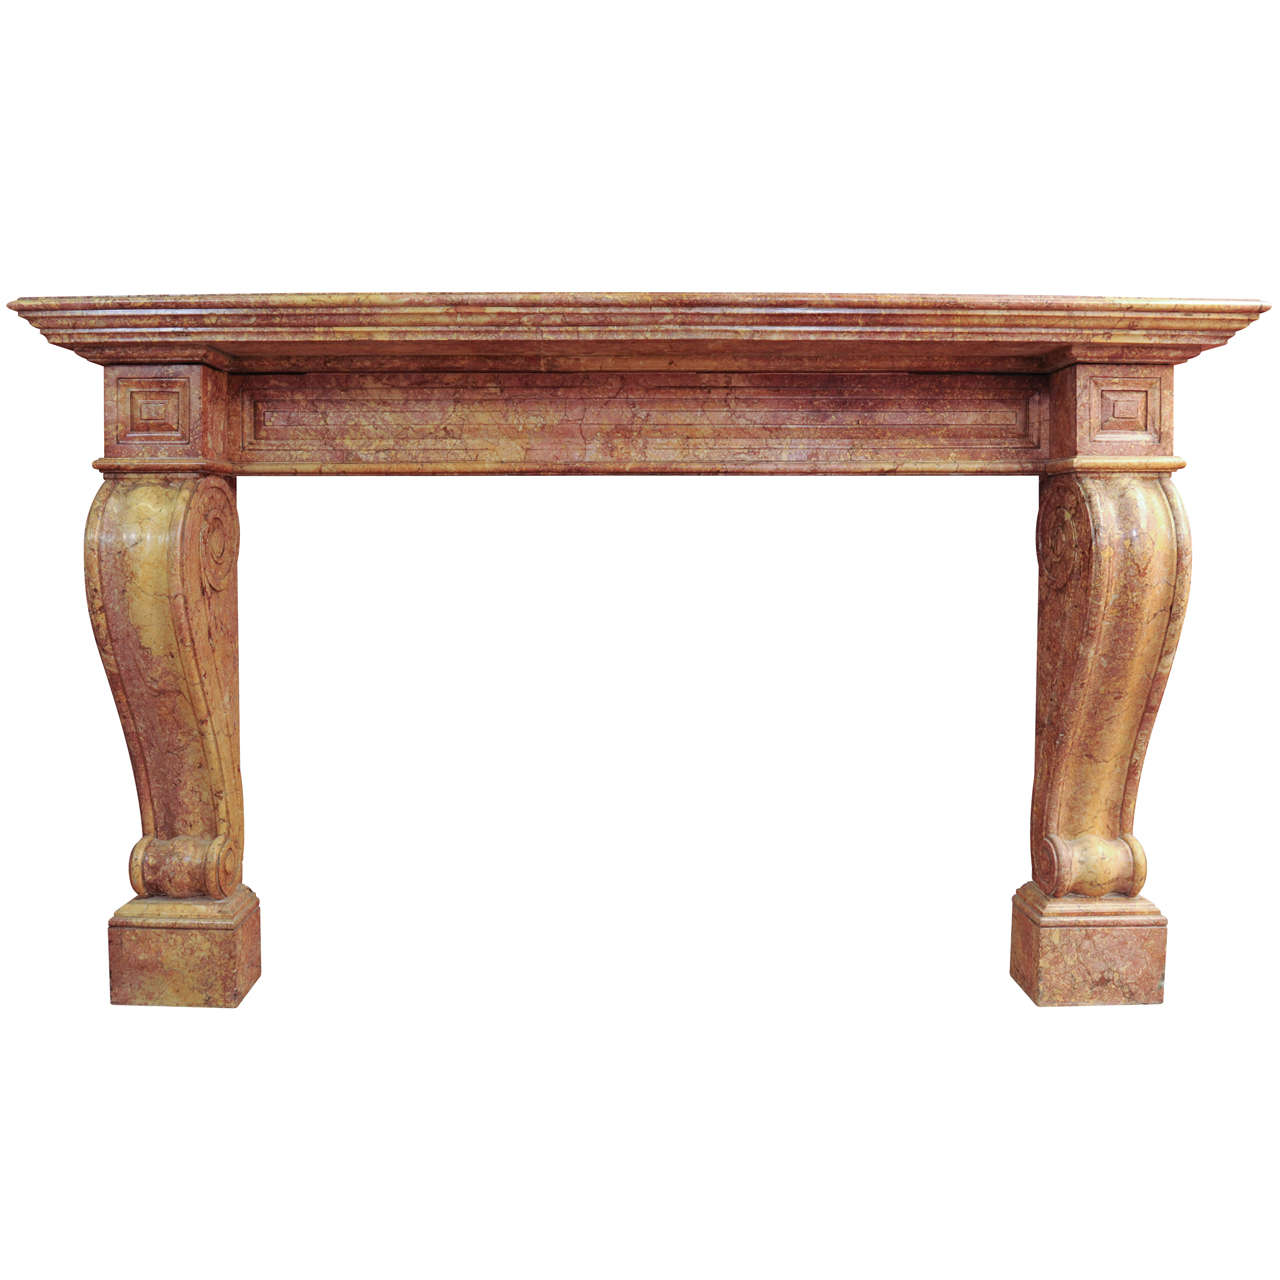 A 19th century French Empire marble fireplace / mantel piece, circa 1820 For Sale